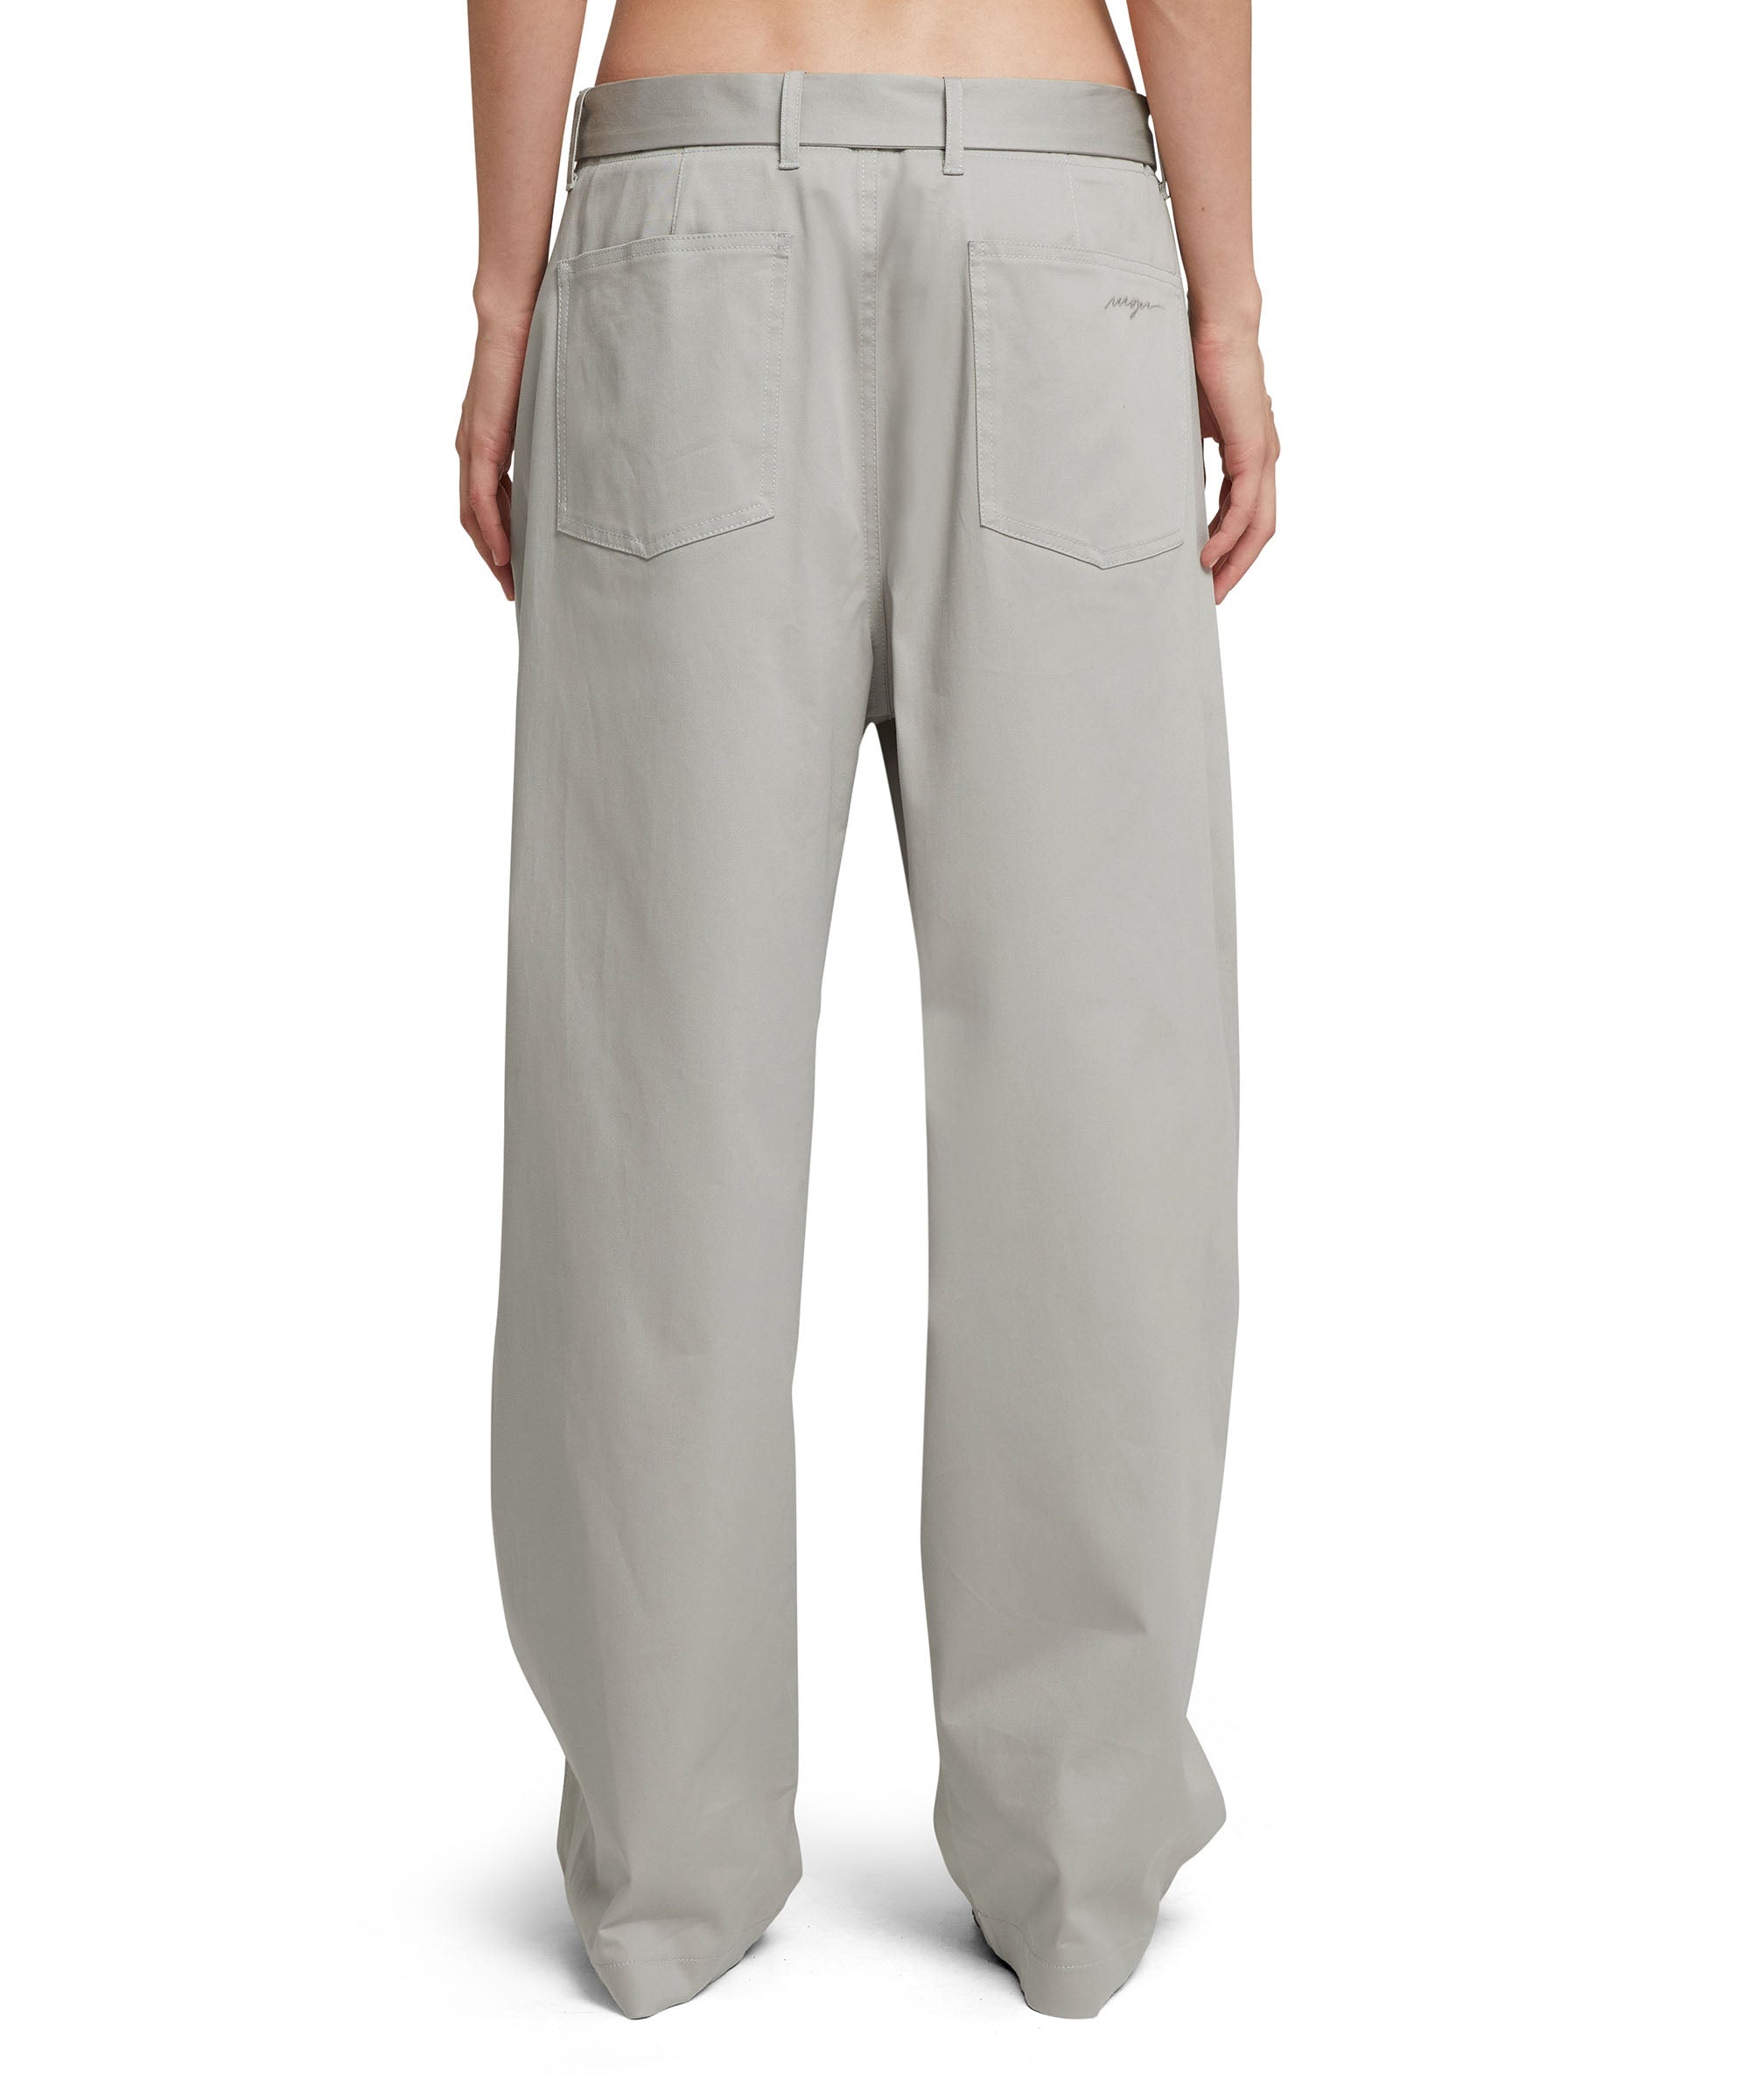 Stretch cotton gabardine pants with belted waist - 3